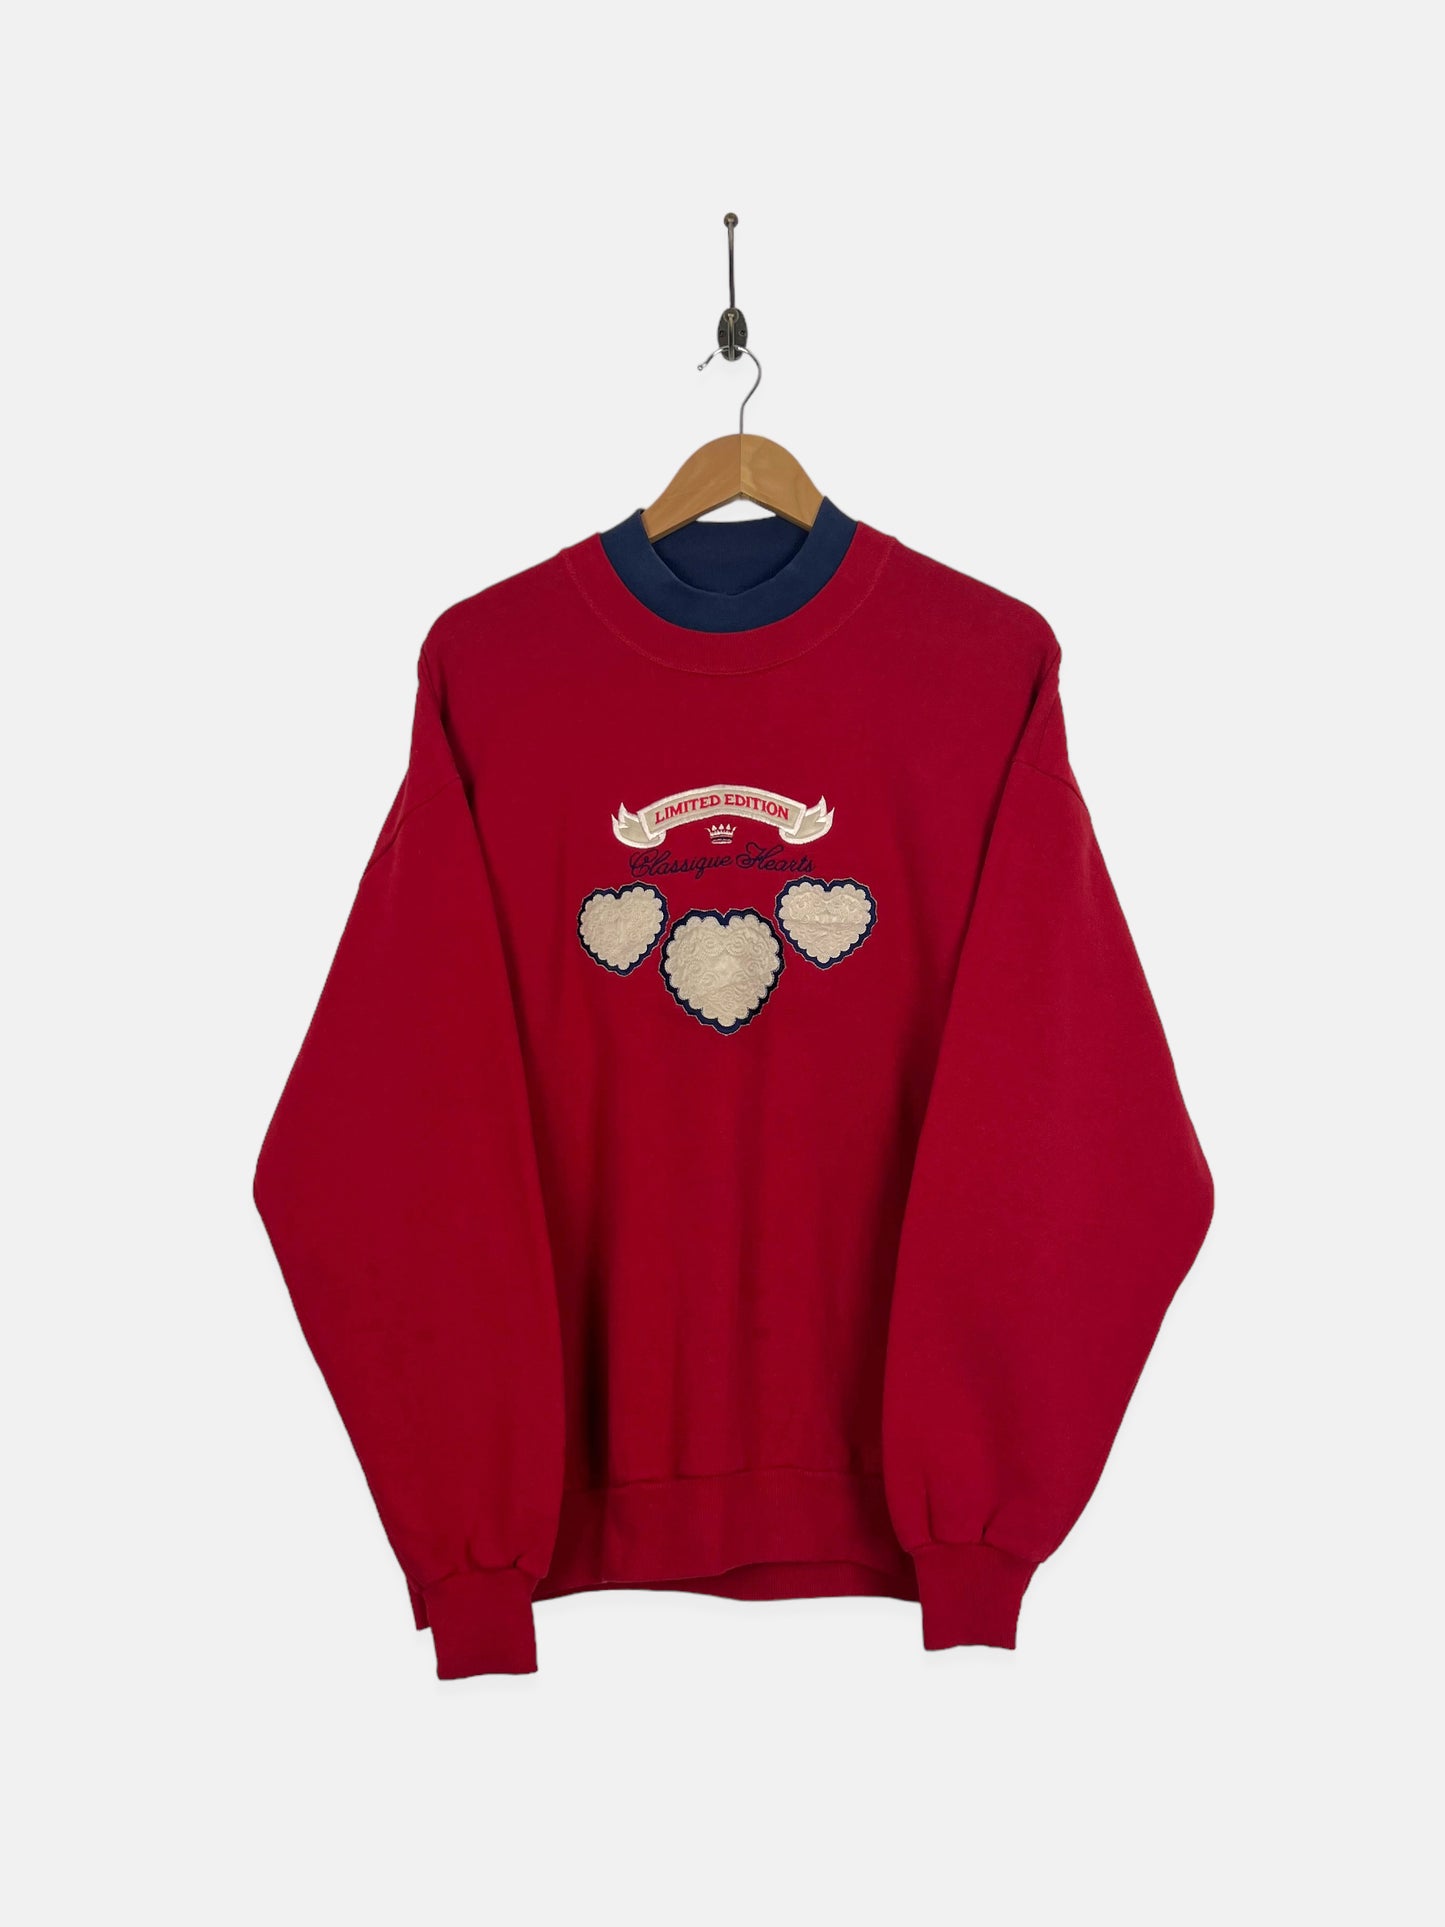 90's Classique Hearts USA Made Embroidered Vintage High-Neck Sweatshirt Size L-XL